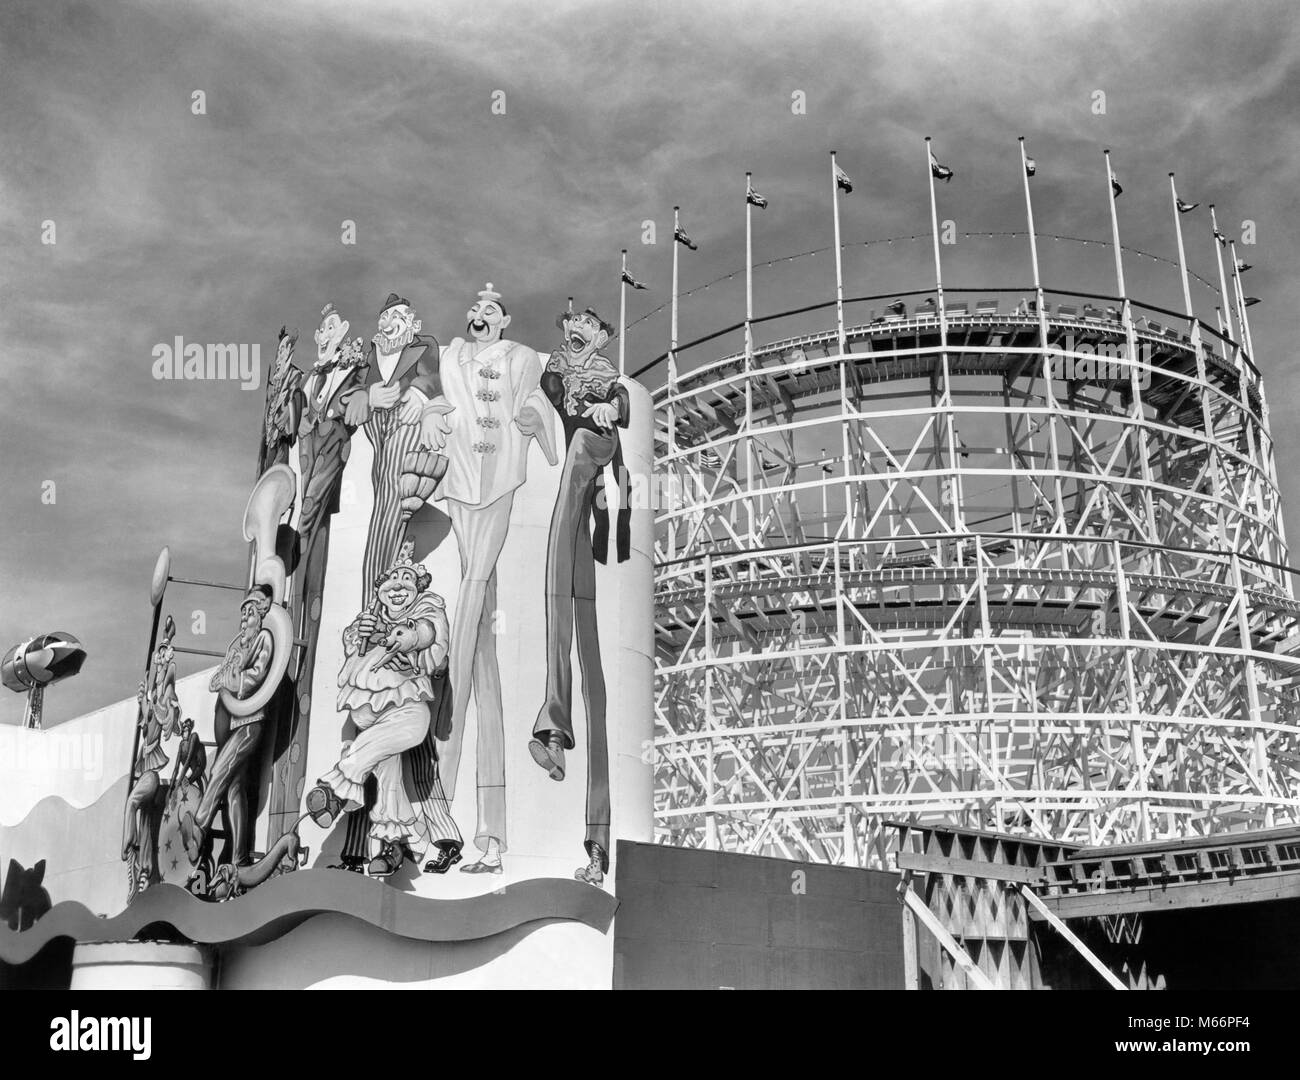 1930s 1939 WORLD'S FAIR CLOWN MURAL AND ROLLER COASTER IN AMUSEMENT AREA NEW YORK CITY NY USA - r1396 PAL001 HARS B&W BLACK AND WHITE CORONA PARK EXPO EXPOSITION FLUSHING MEADOW MURAL OLD FASHIONED ROLLER COASTER Stock Photo